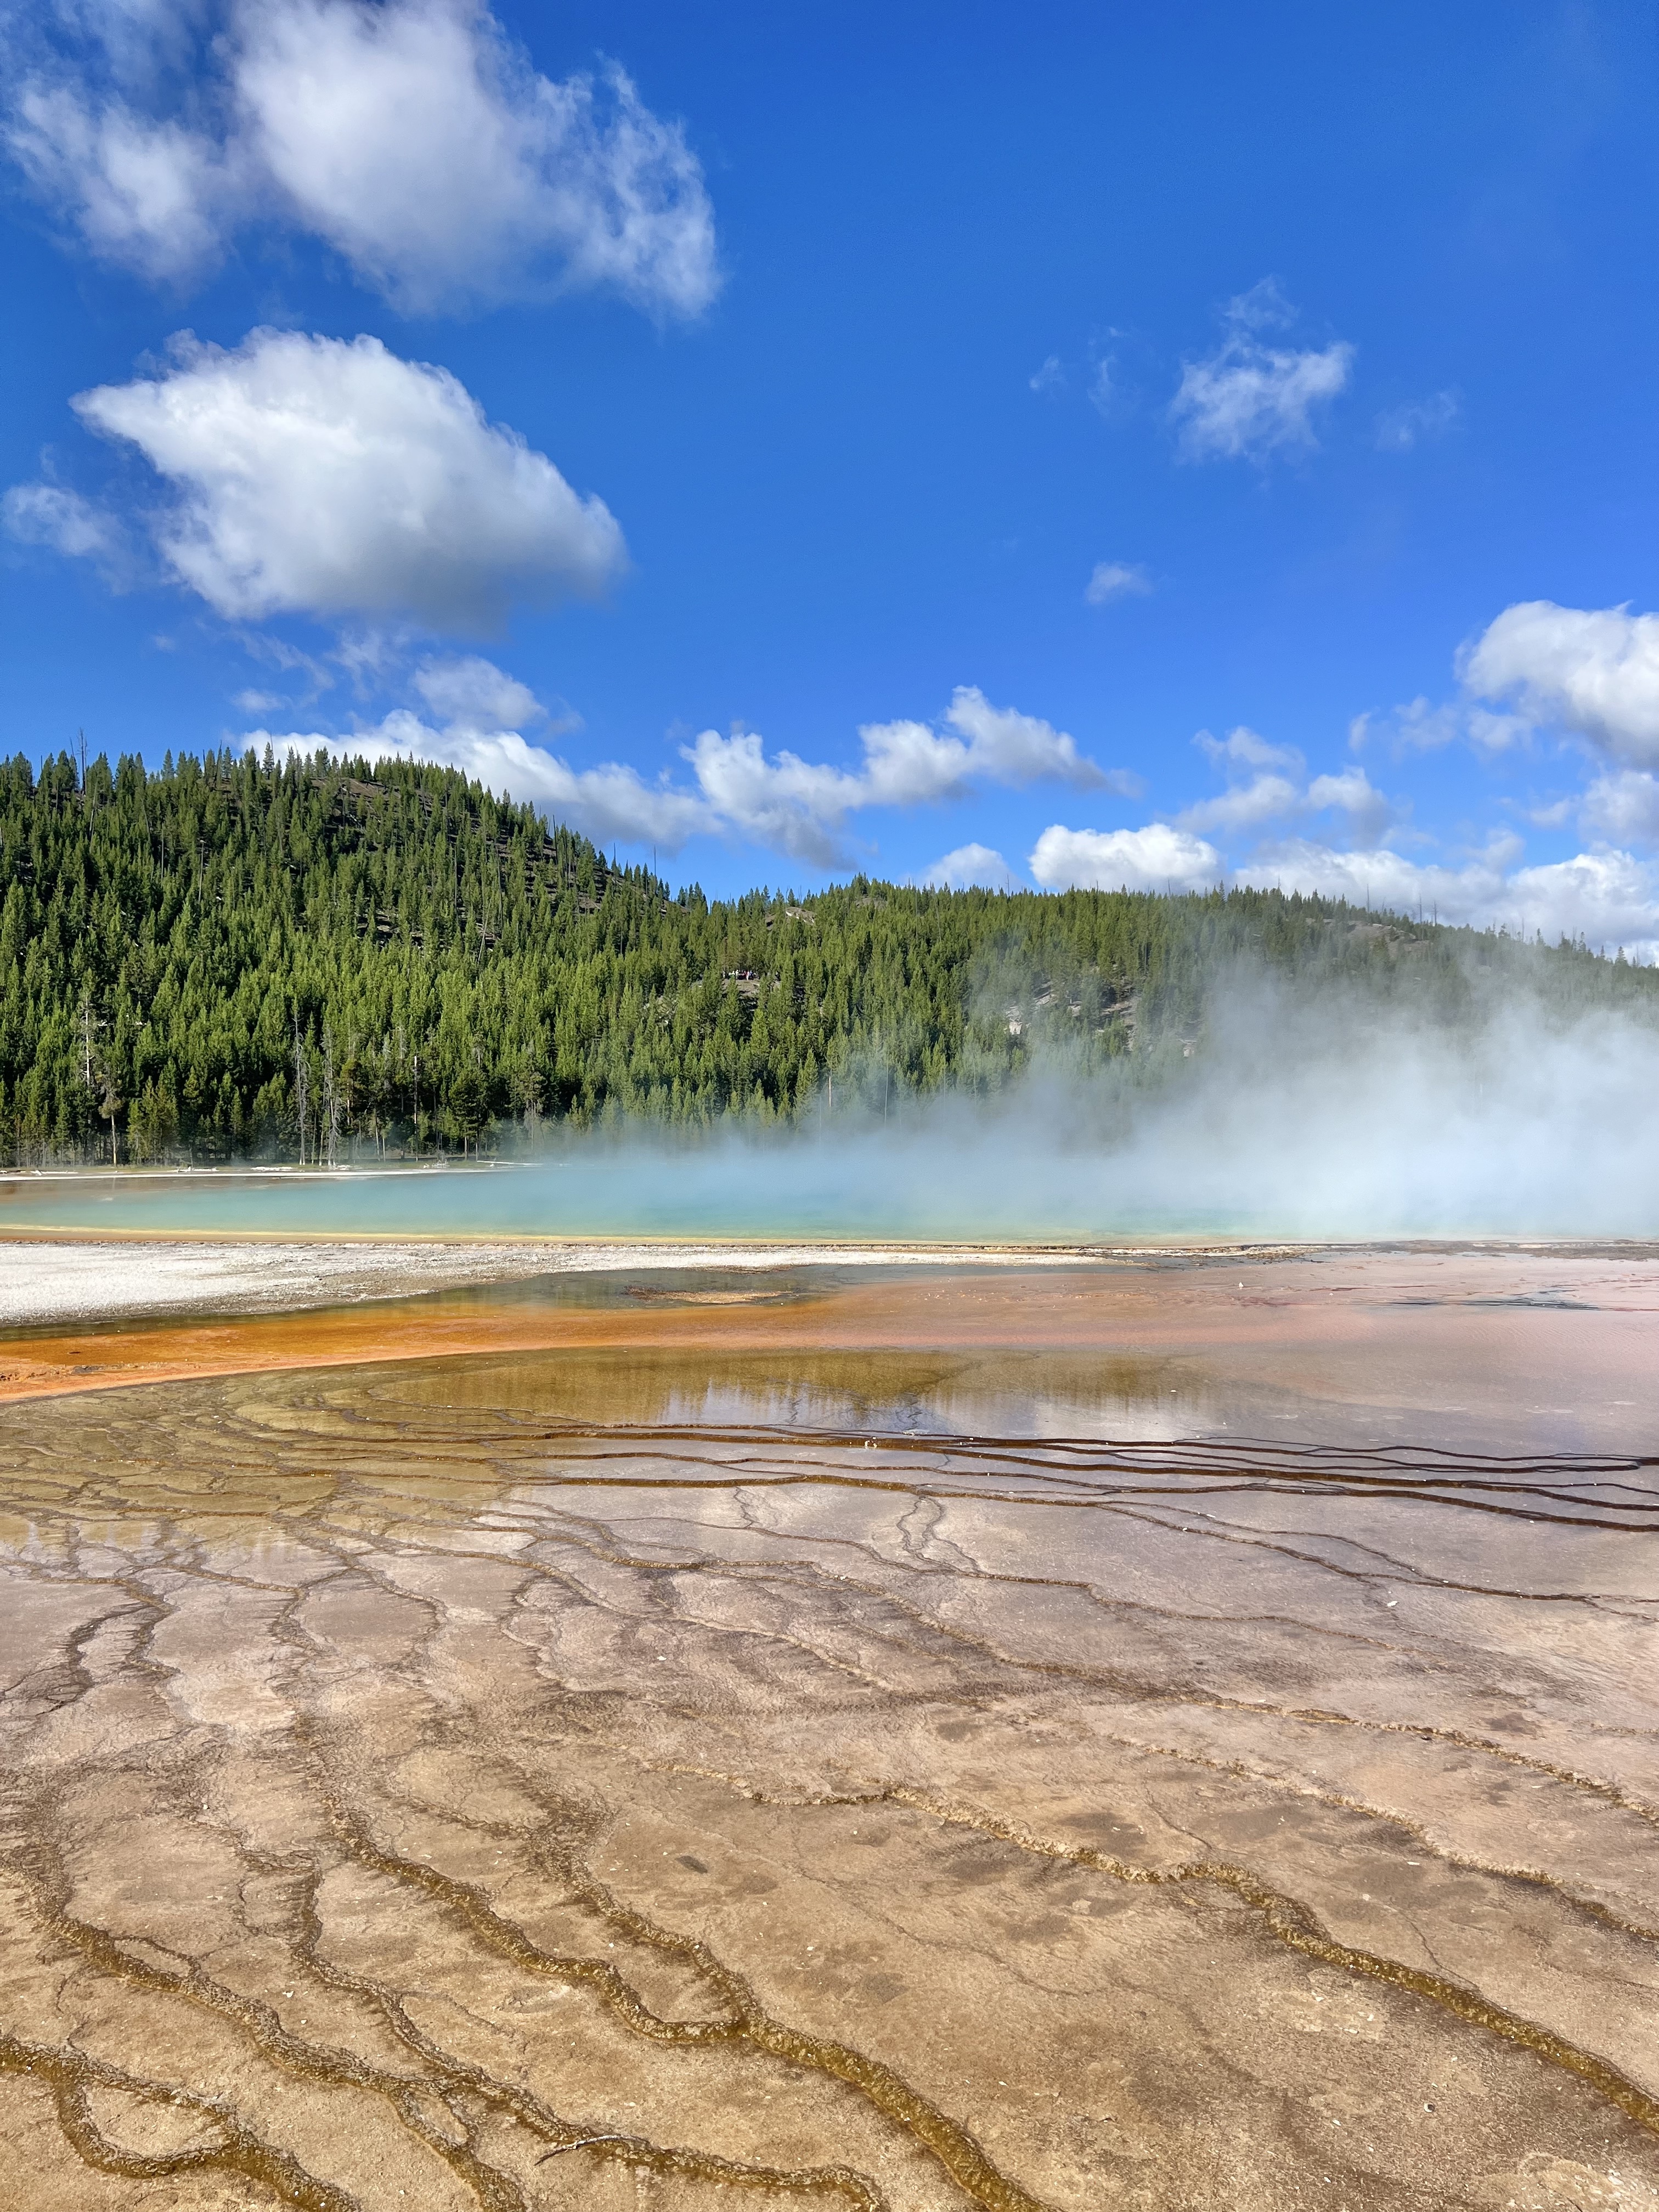 grand prismatic springs - yellowstone national park
